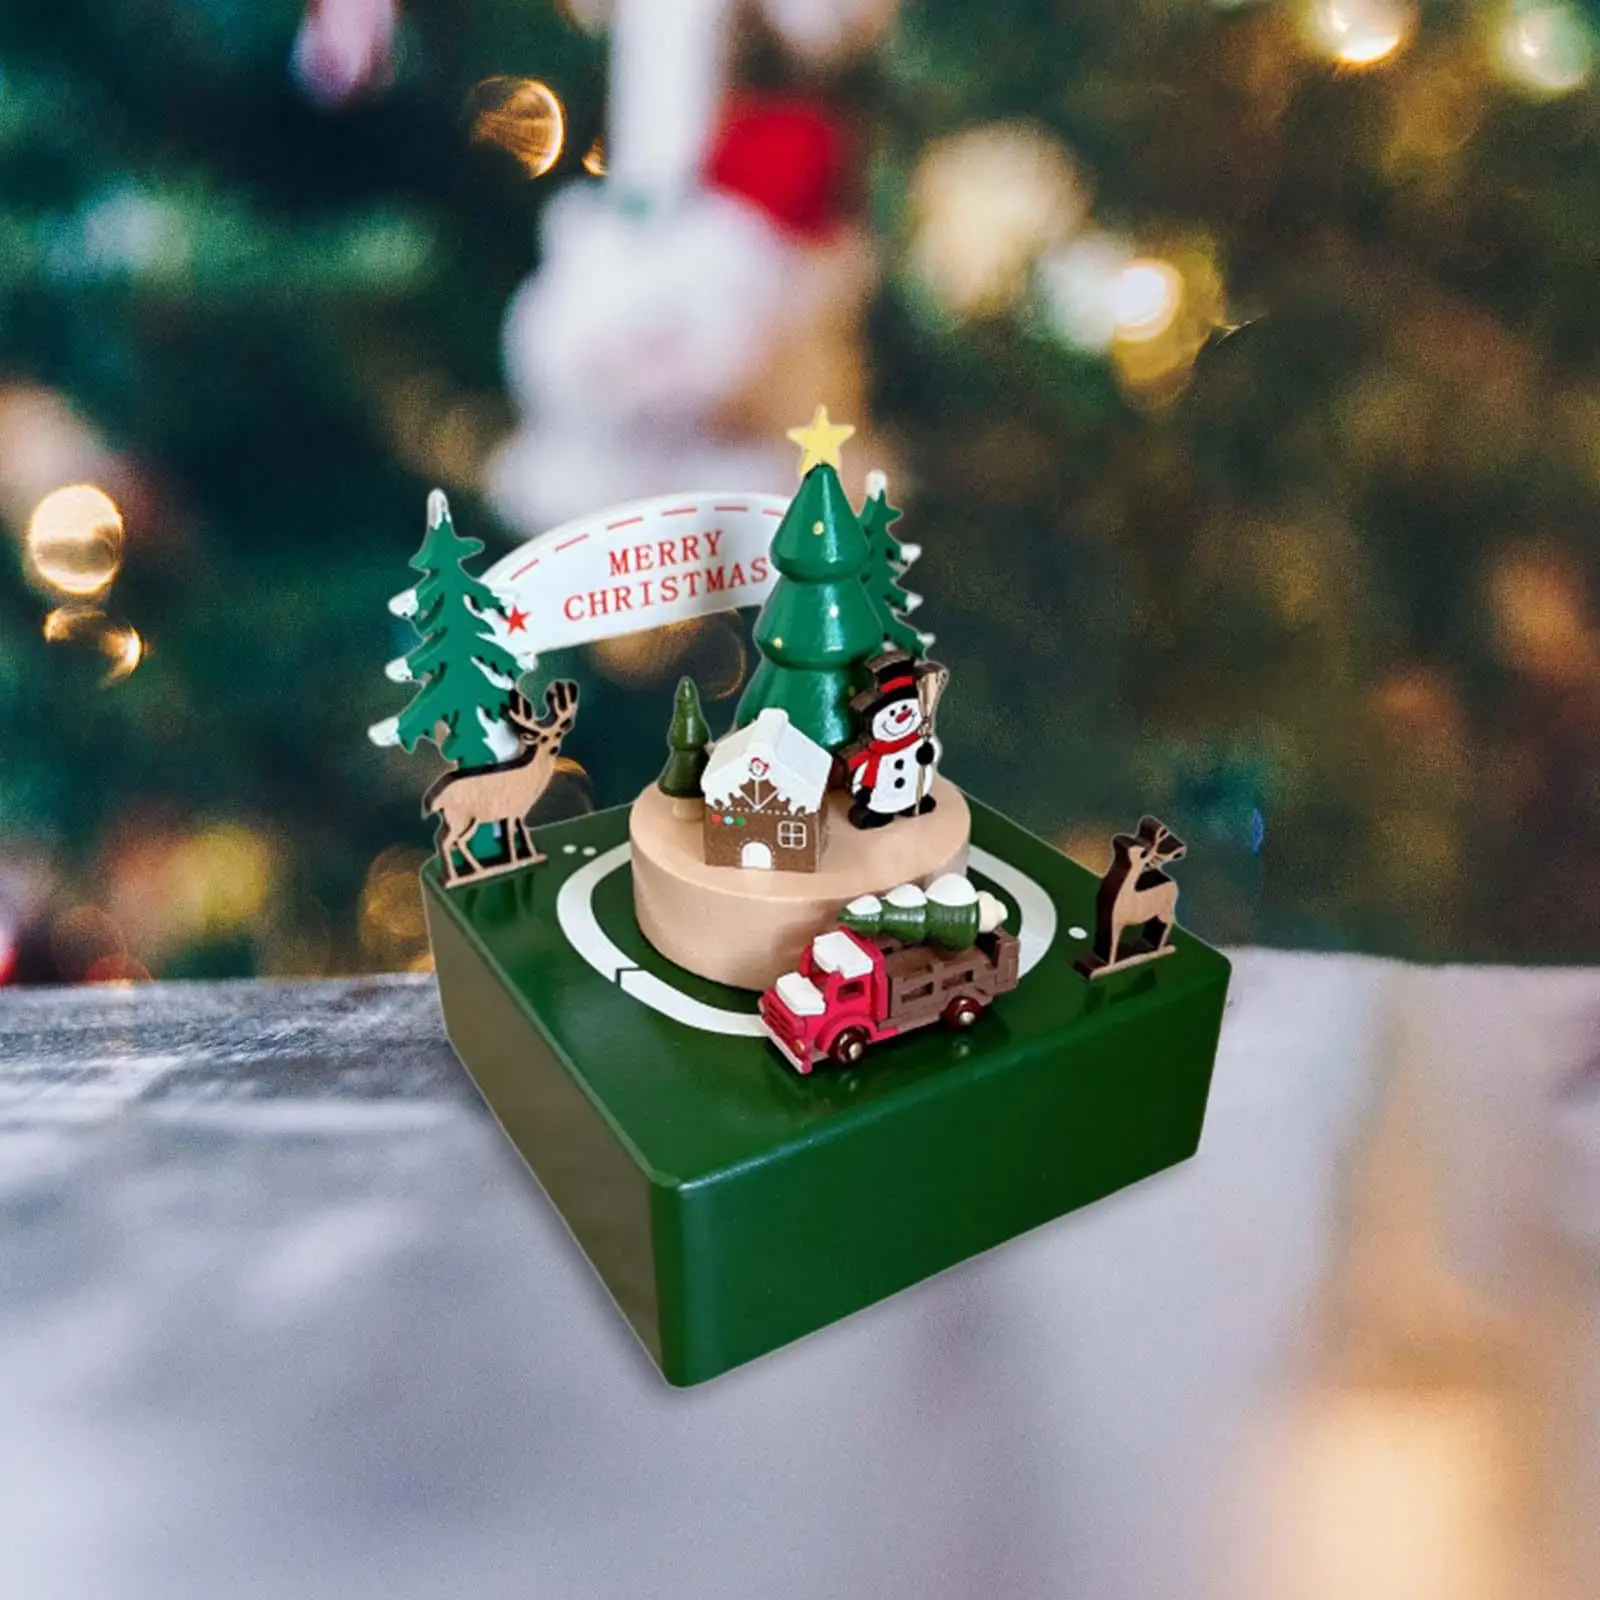 Christmas Music Box Christmas Figurine Crafts Table Centerpiece Tabletop Ornament for Office Festivals Desk Fireplace Home